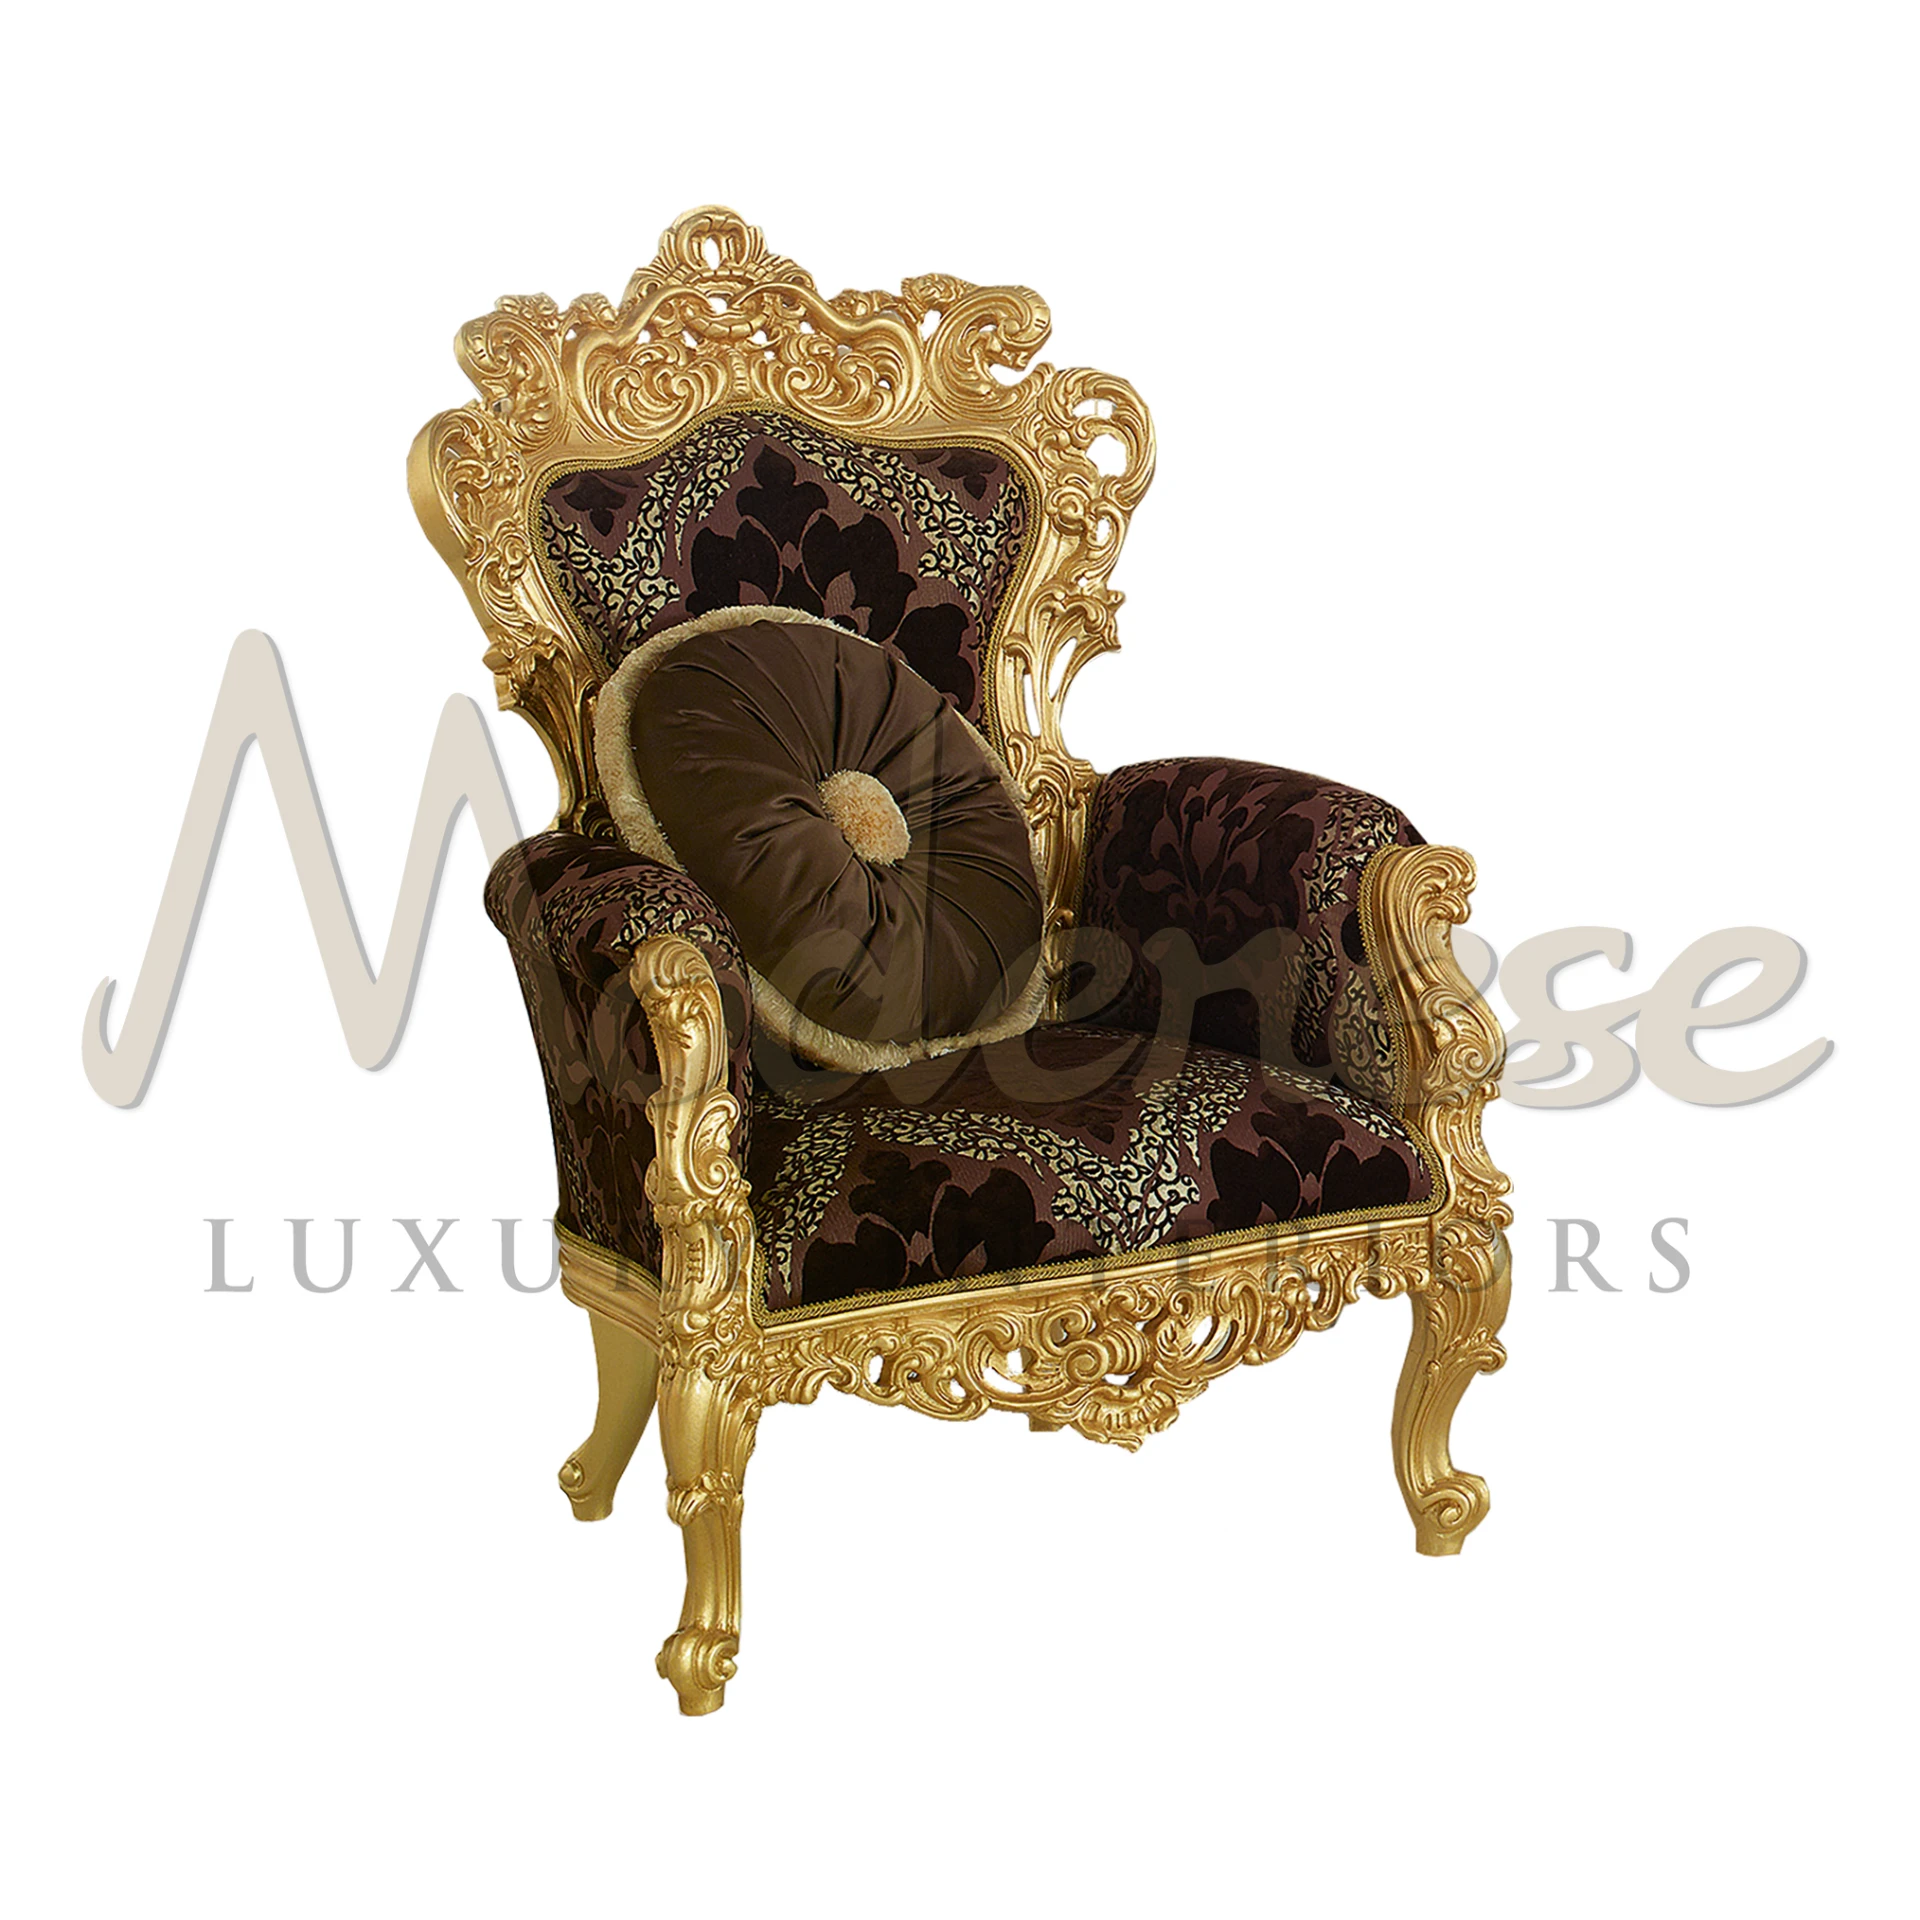 Gilded baroque armchair with maroon floral-patterned upholstery and a round tufted cushion in a luxurious setting.